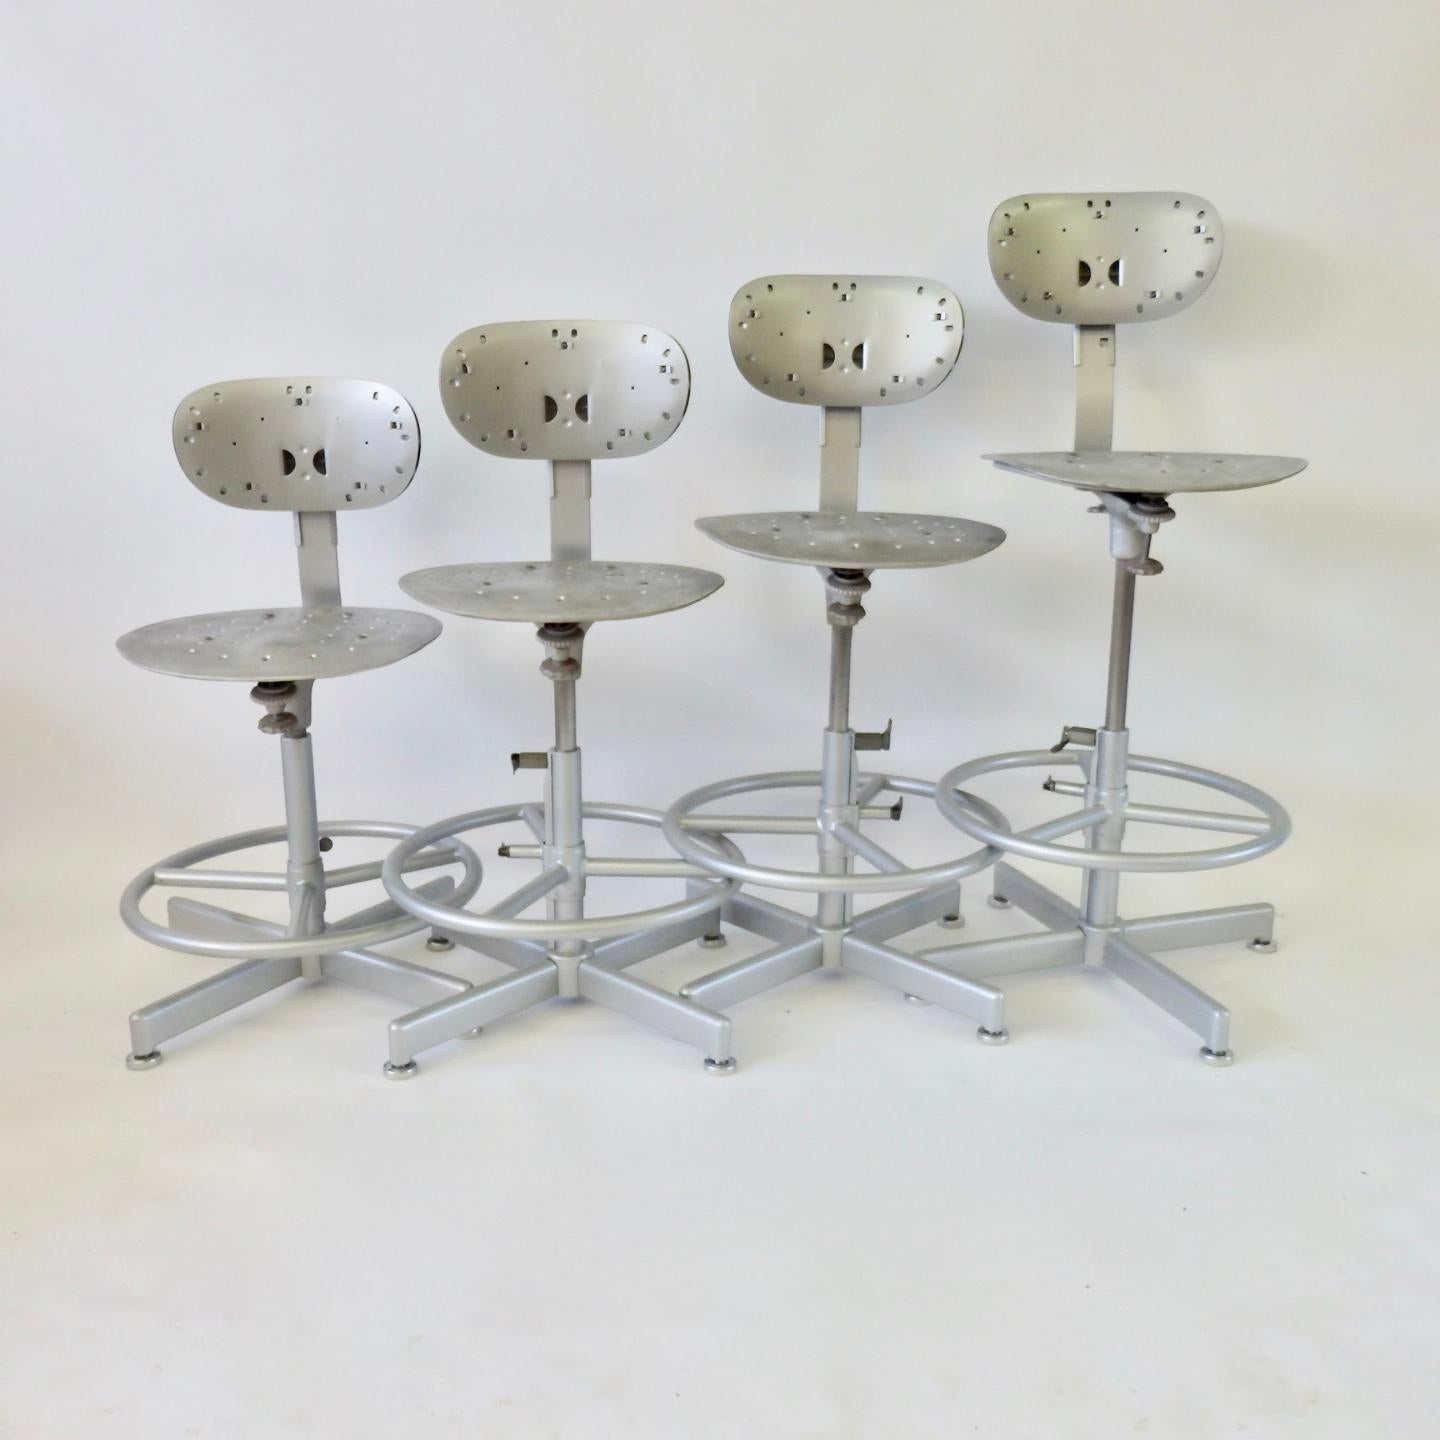 Industrial bar stools with five way adjustments. Seat height - depth of backrest - height of backrest - spring tension at front edge of seat - footrest height. Powder coated steel base, polished steel upright shaft, aluminum seat pad. New glides